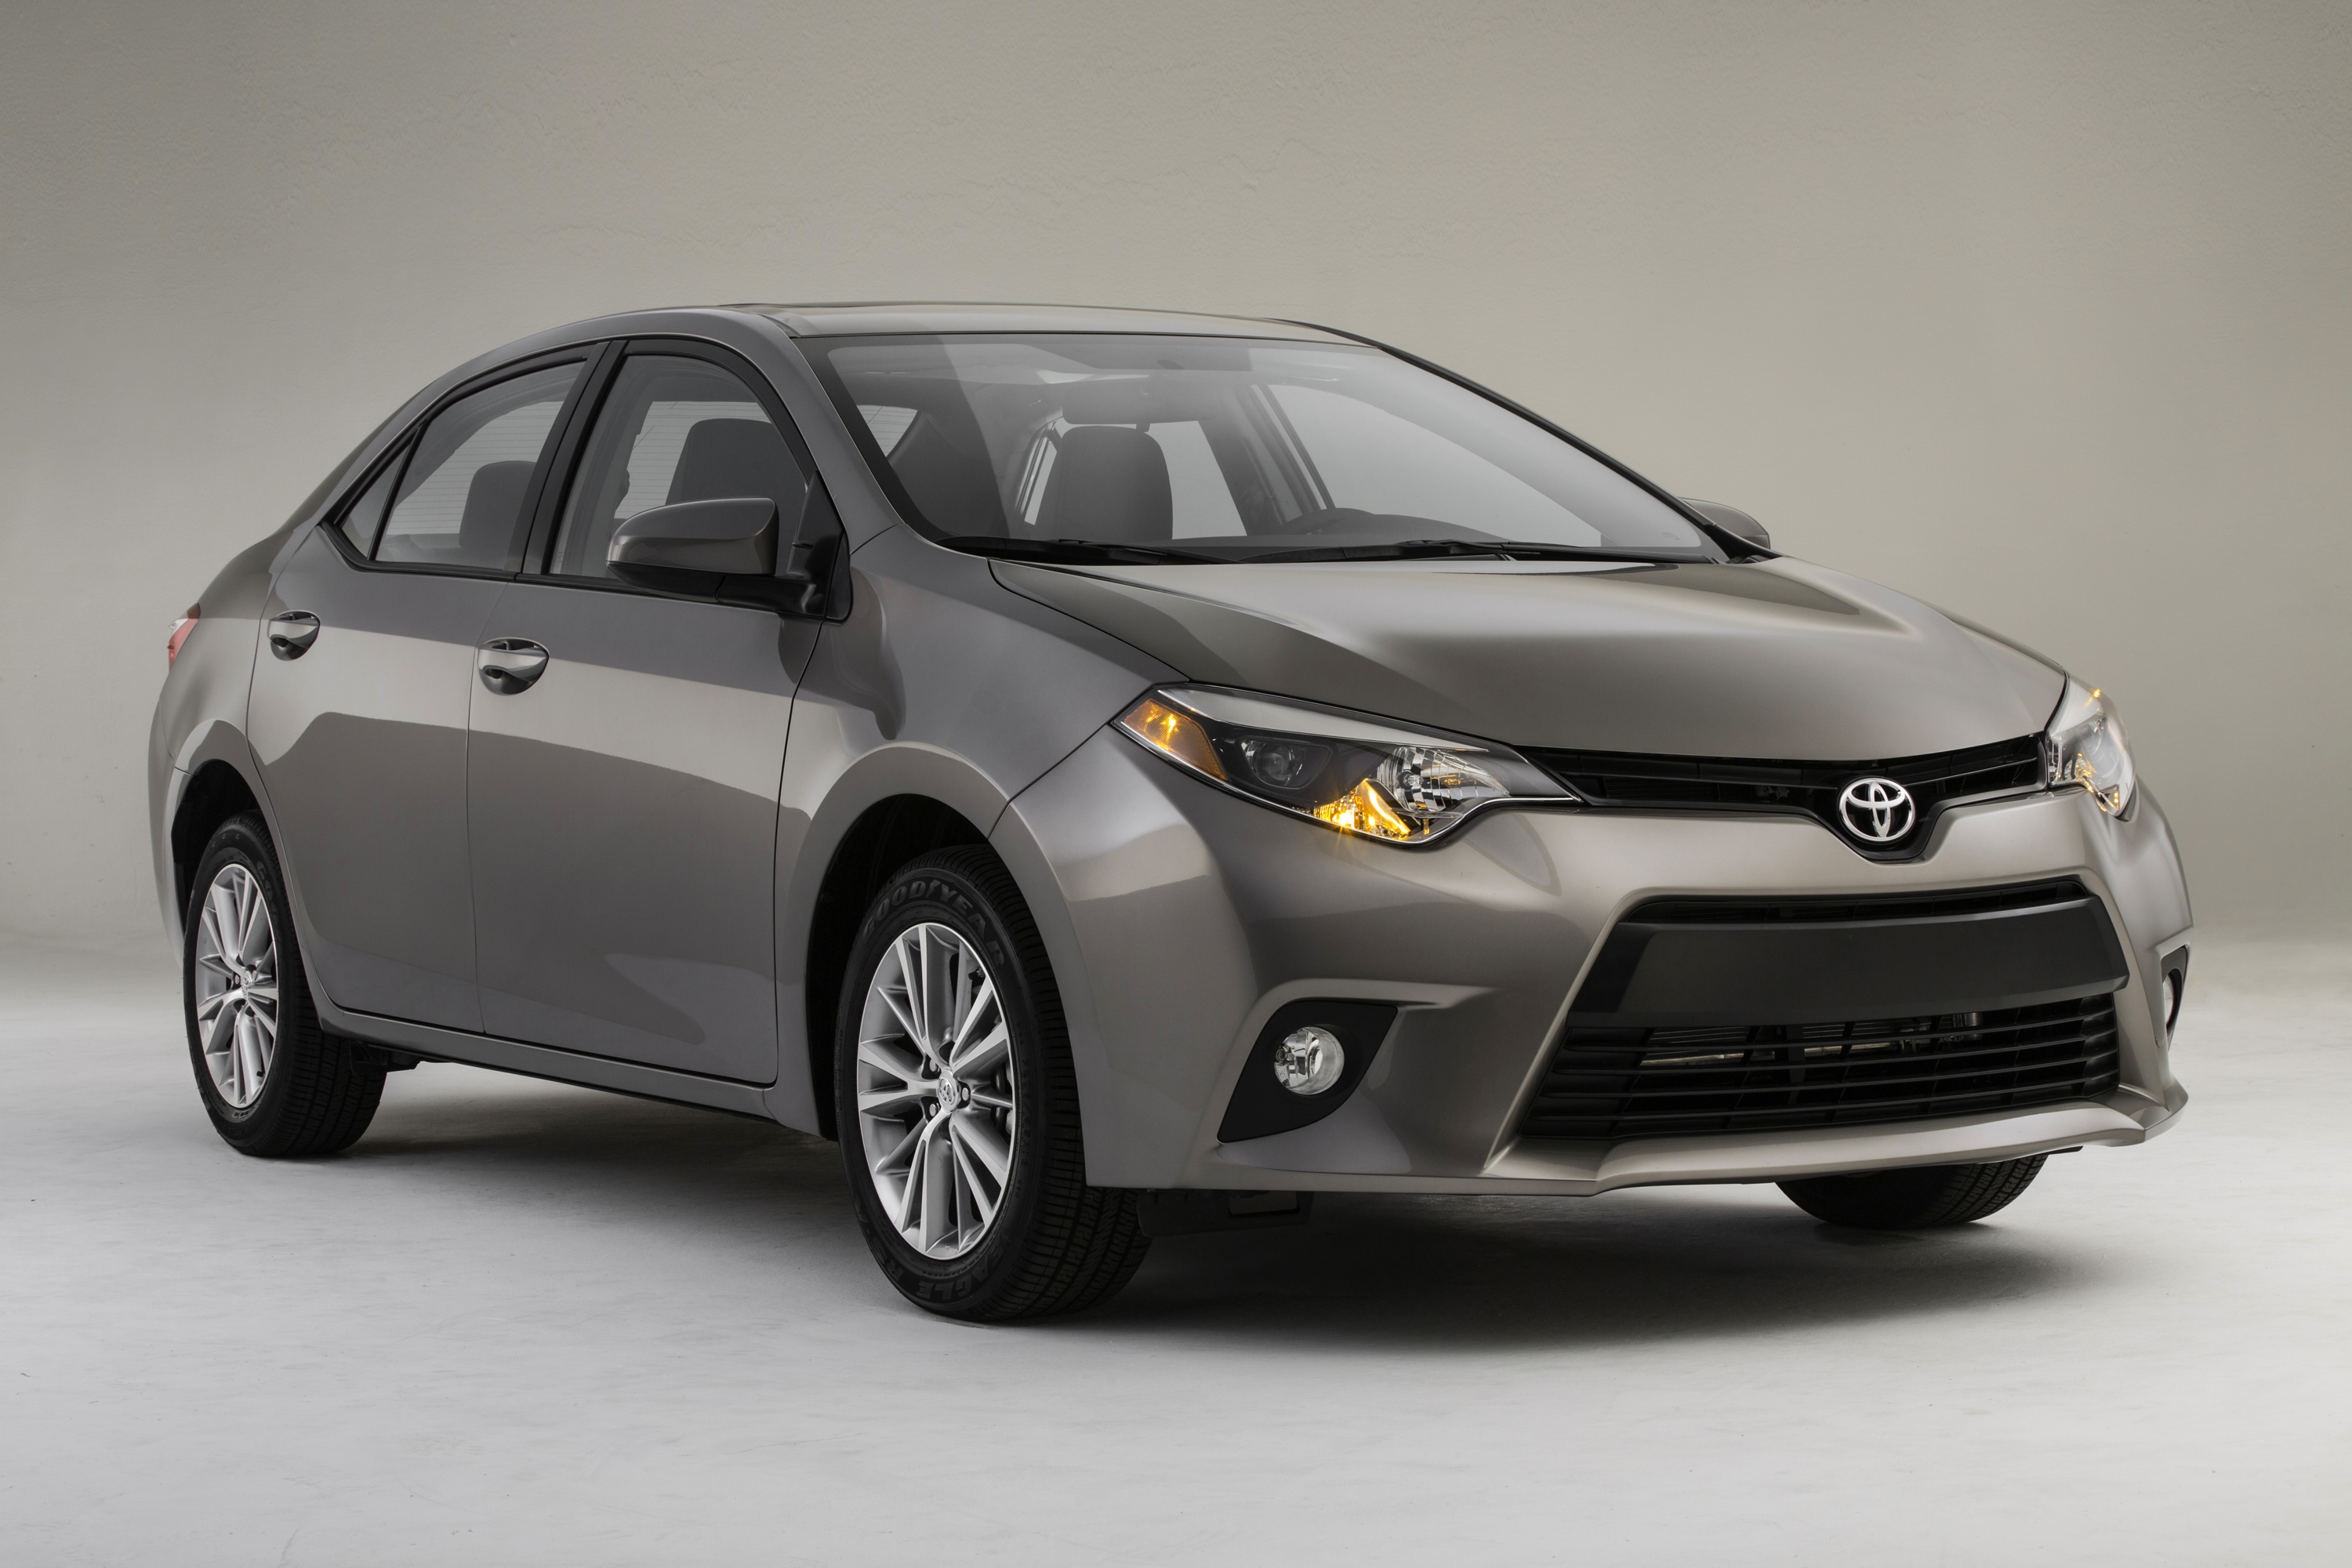 2014 Toyota Corolla Reviews, Insights, and Specs